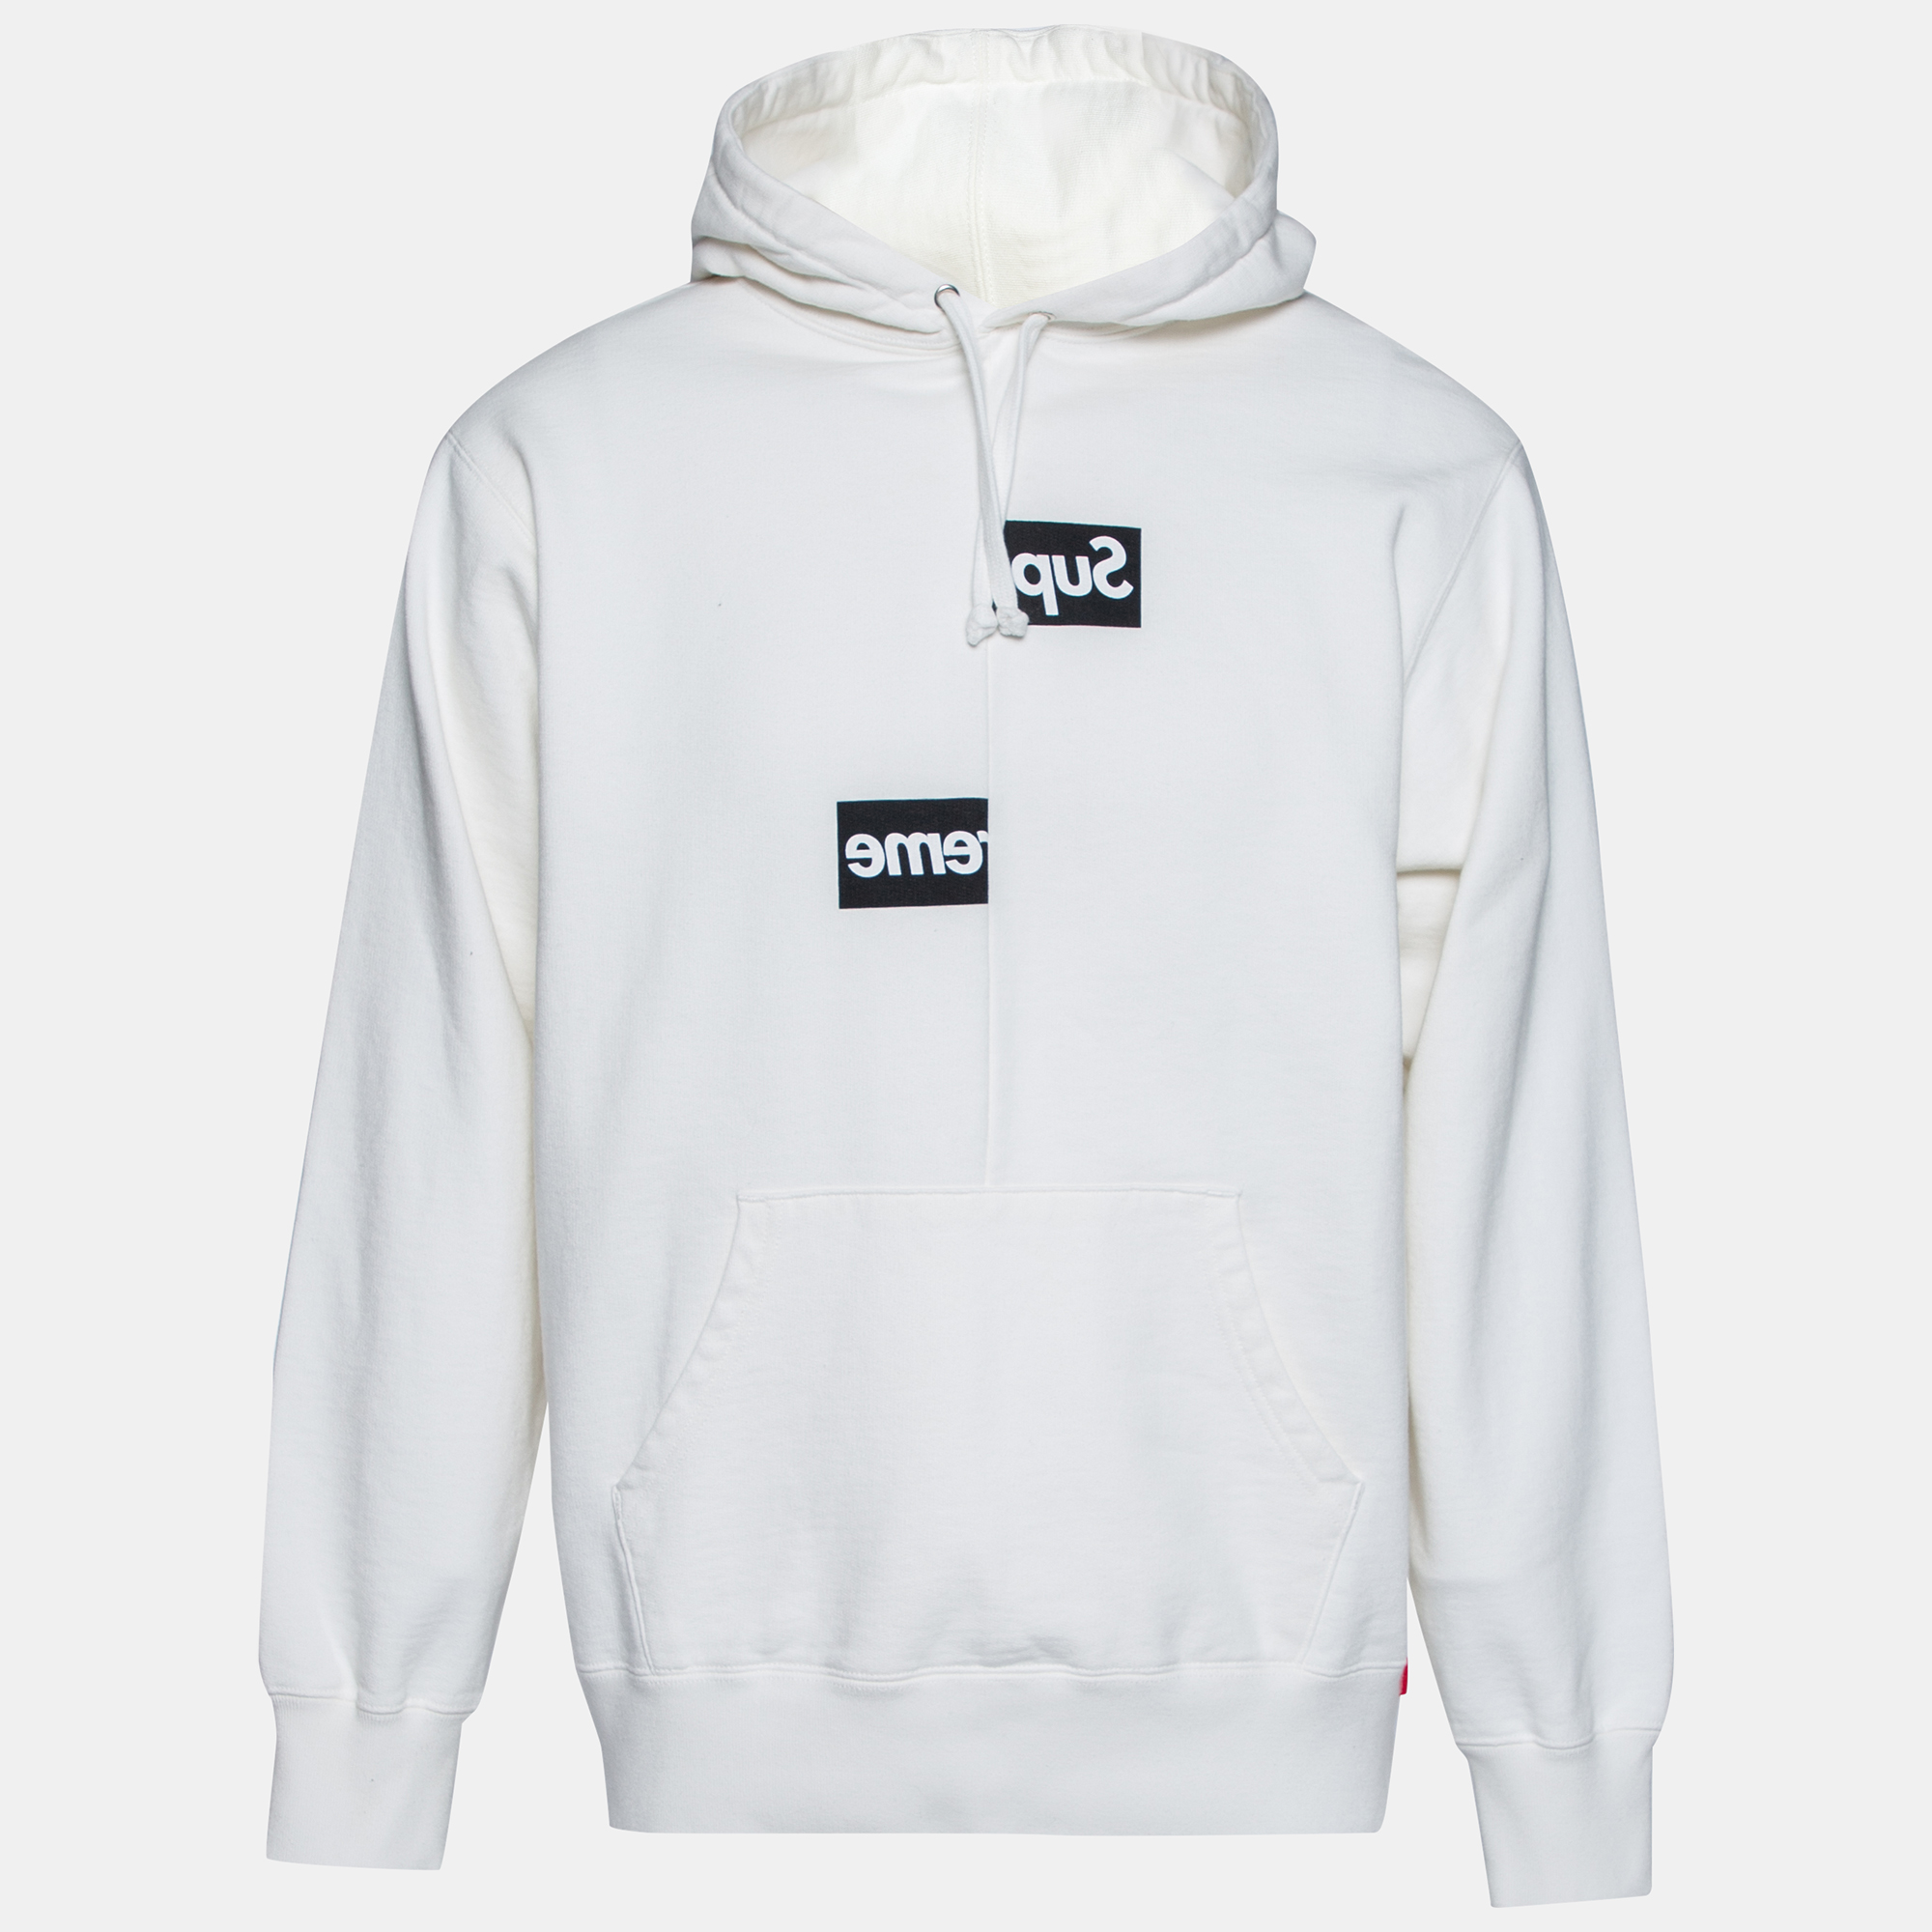 This hoodie from Supreme x Comme des Garçons is great for casual use and will help you stay comfortable. It is made from white terry knit fabric with split detailed logos elevating its look. It has long sleeves and one pocket. Match this hoodie with jeans and sneakers to sport a dapper style.